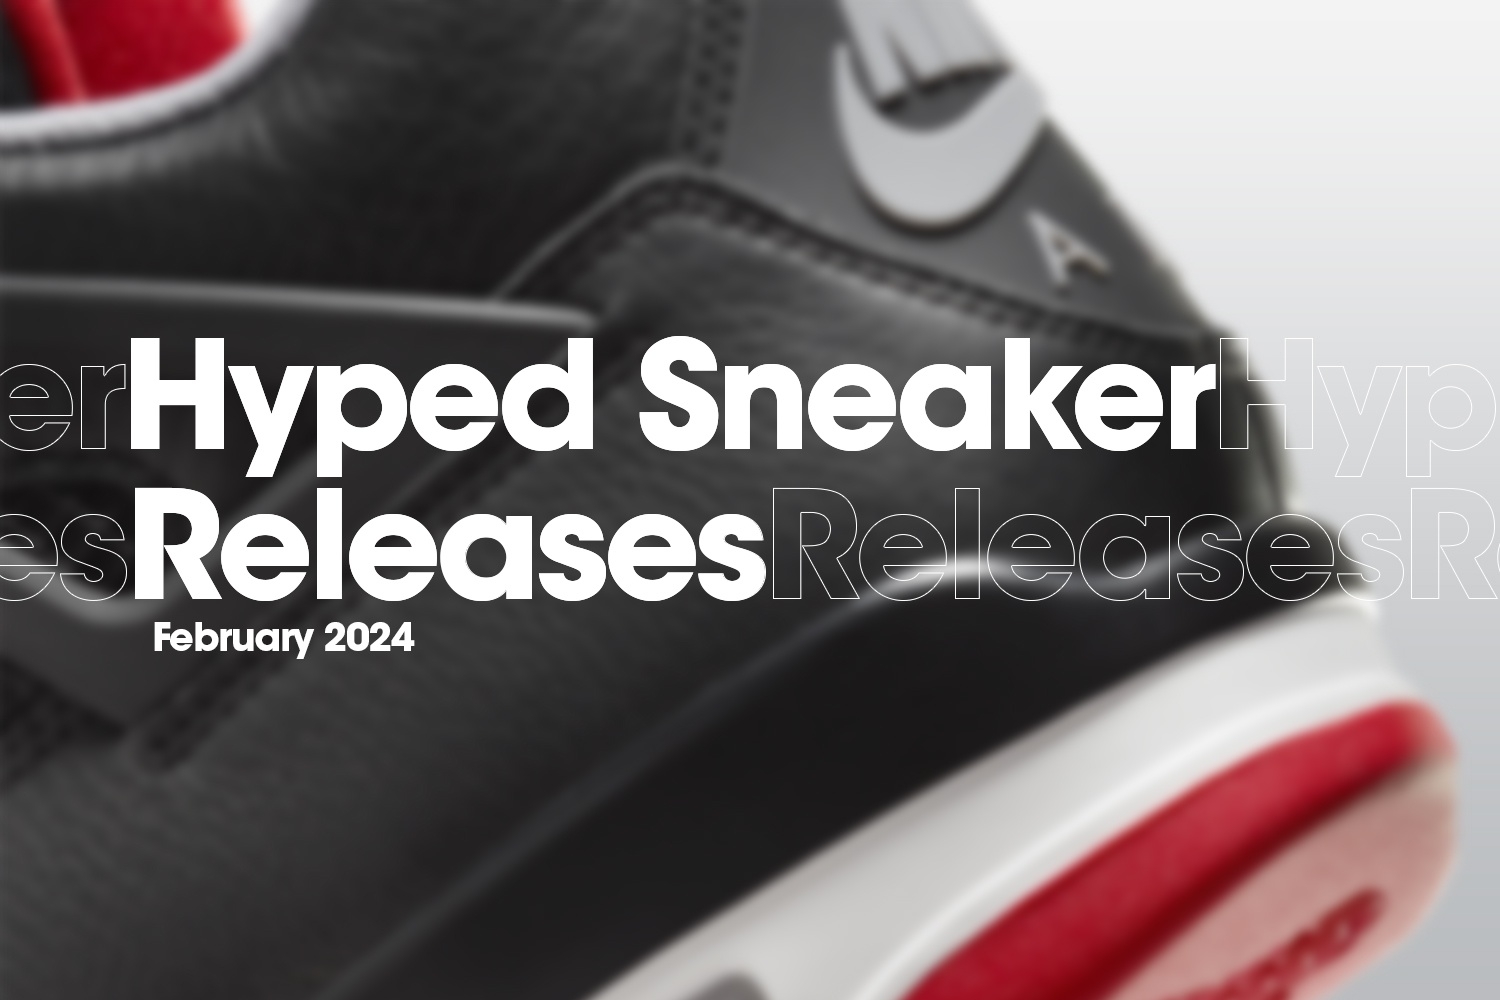 Hyped Sneaker Releases of February 2024